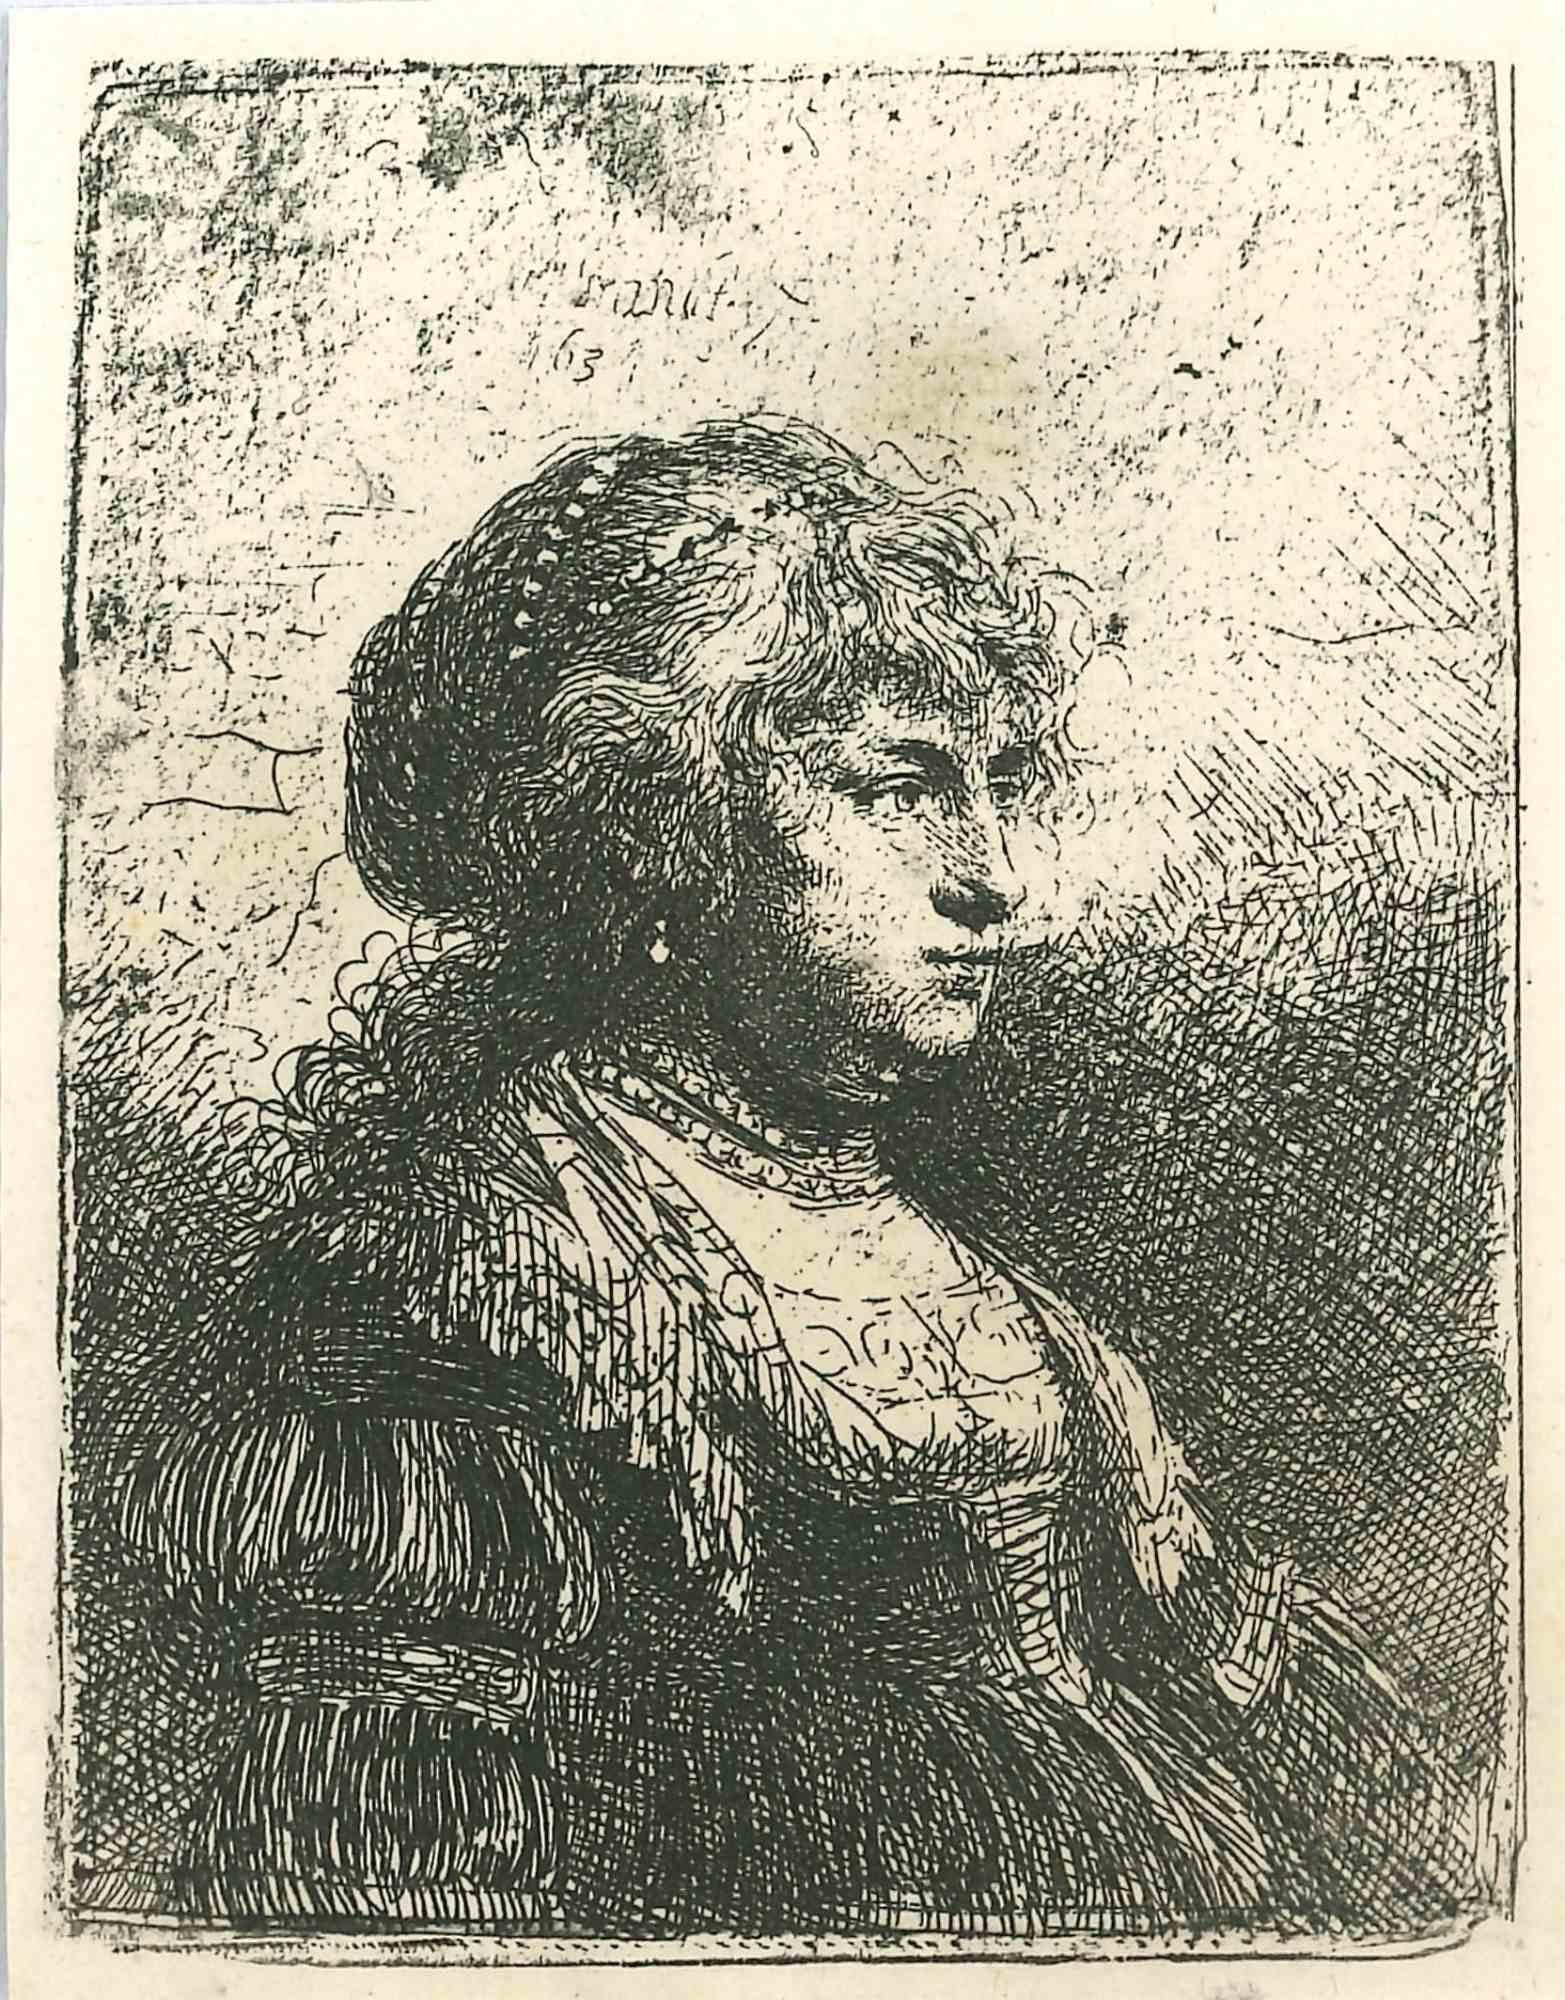 Charles Amand Durand Portrait Print - Saskia with the Pearl - Engraving After Rembrandt - Late 19th Century